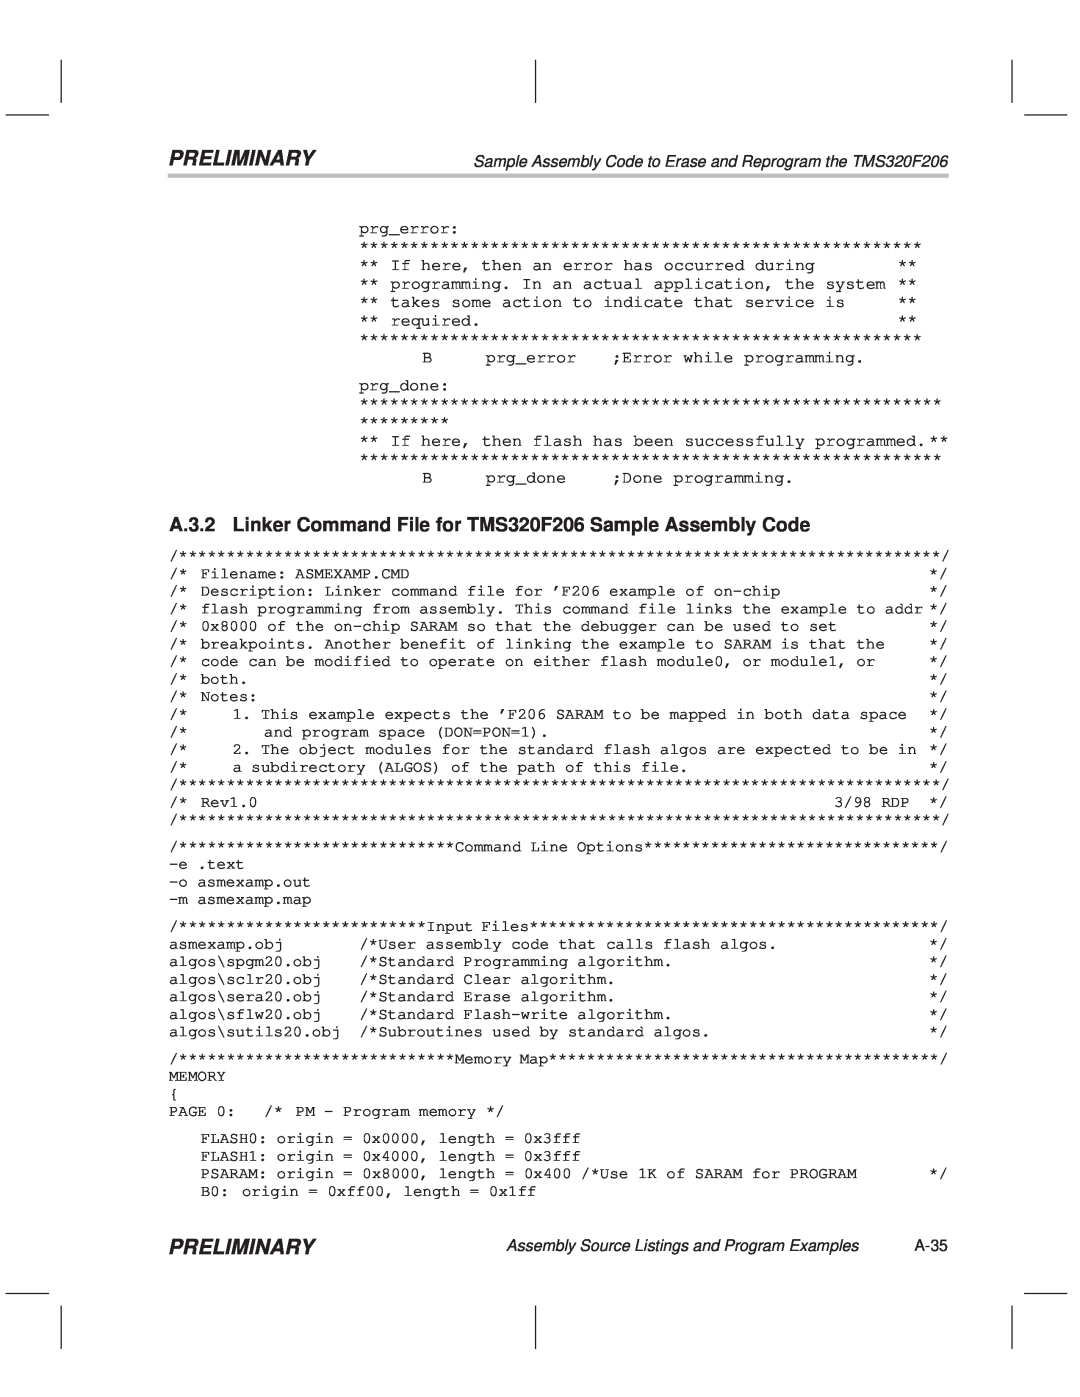 Texas Instruments TMS320F20x/F24x DSP manual Preliminary, Sample Assembly Code to Erase and Reprogram the TMS320F206, A-35 